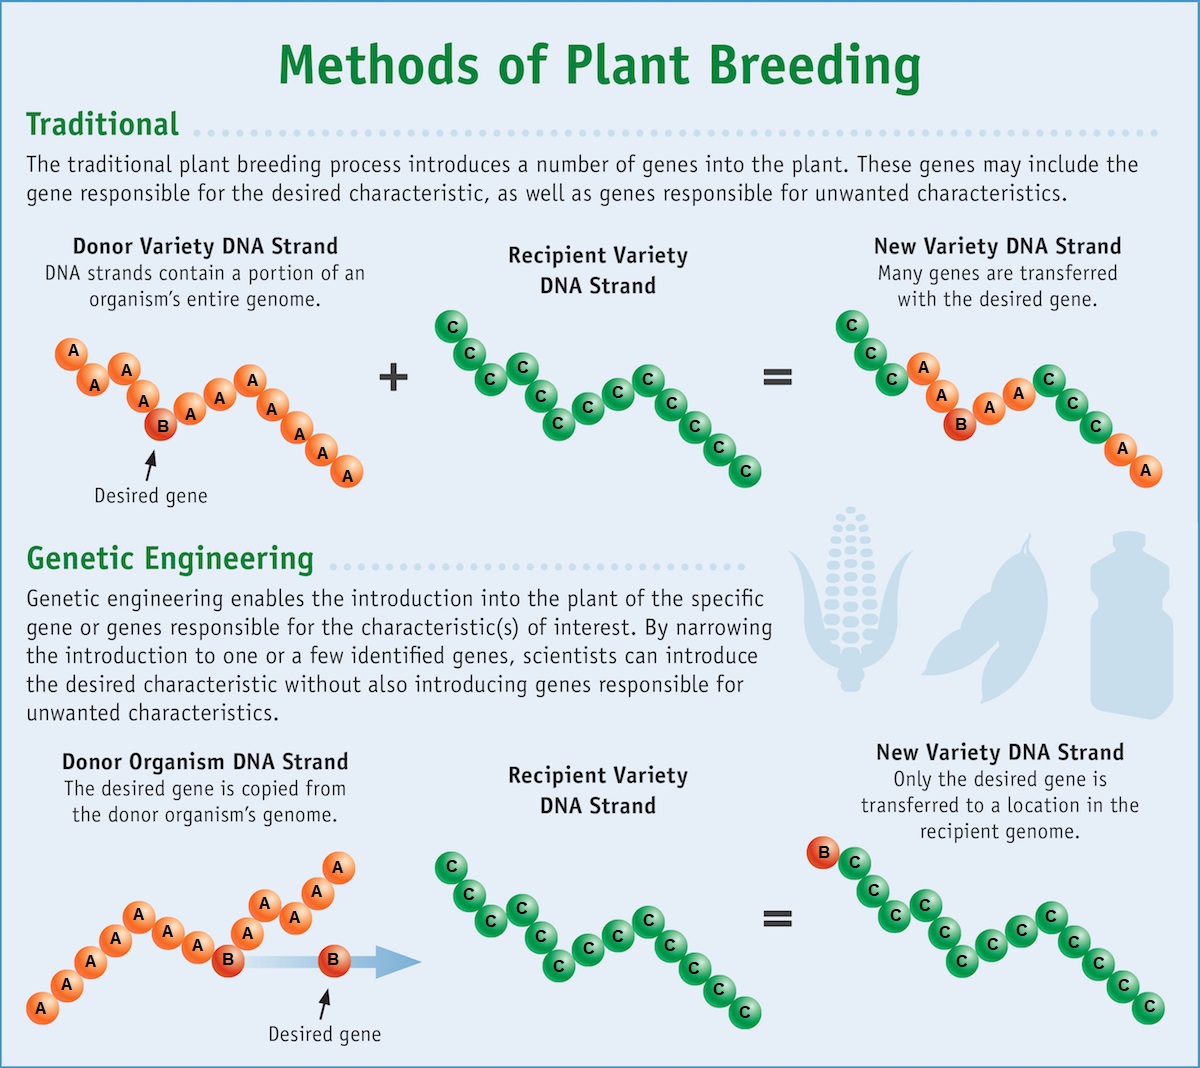 Comparison of traditional plant breeding and genetic engineering